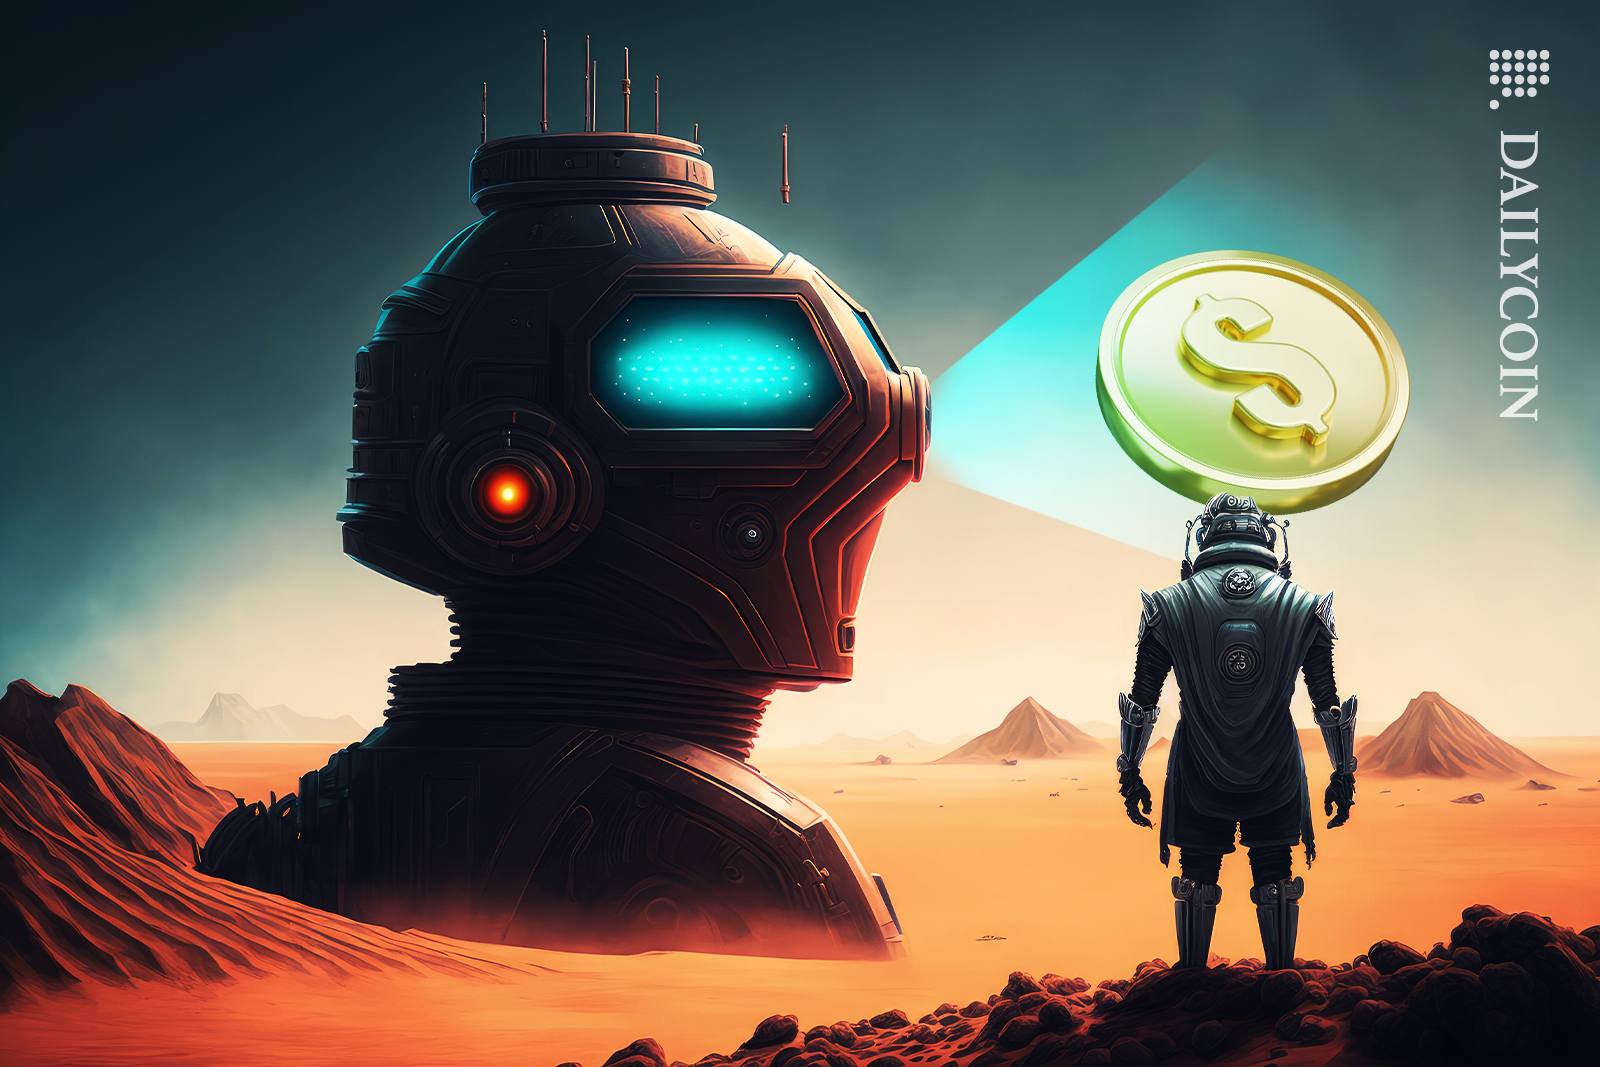 Robot rising from the ground in a desert with shining eyes while a space man with a dollar coin above his head is looking.